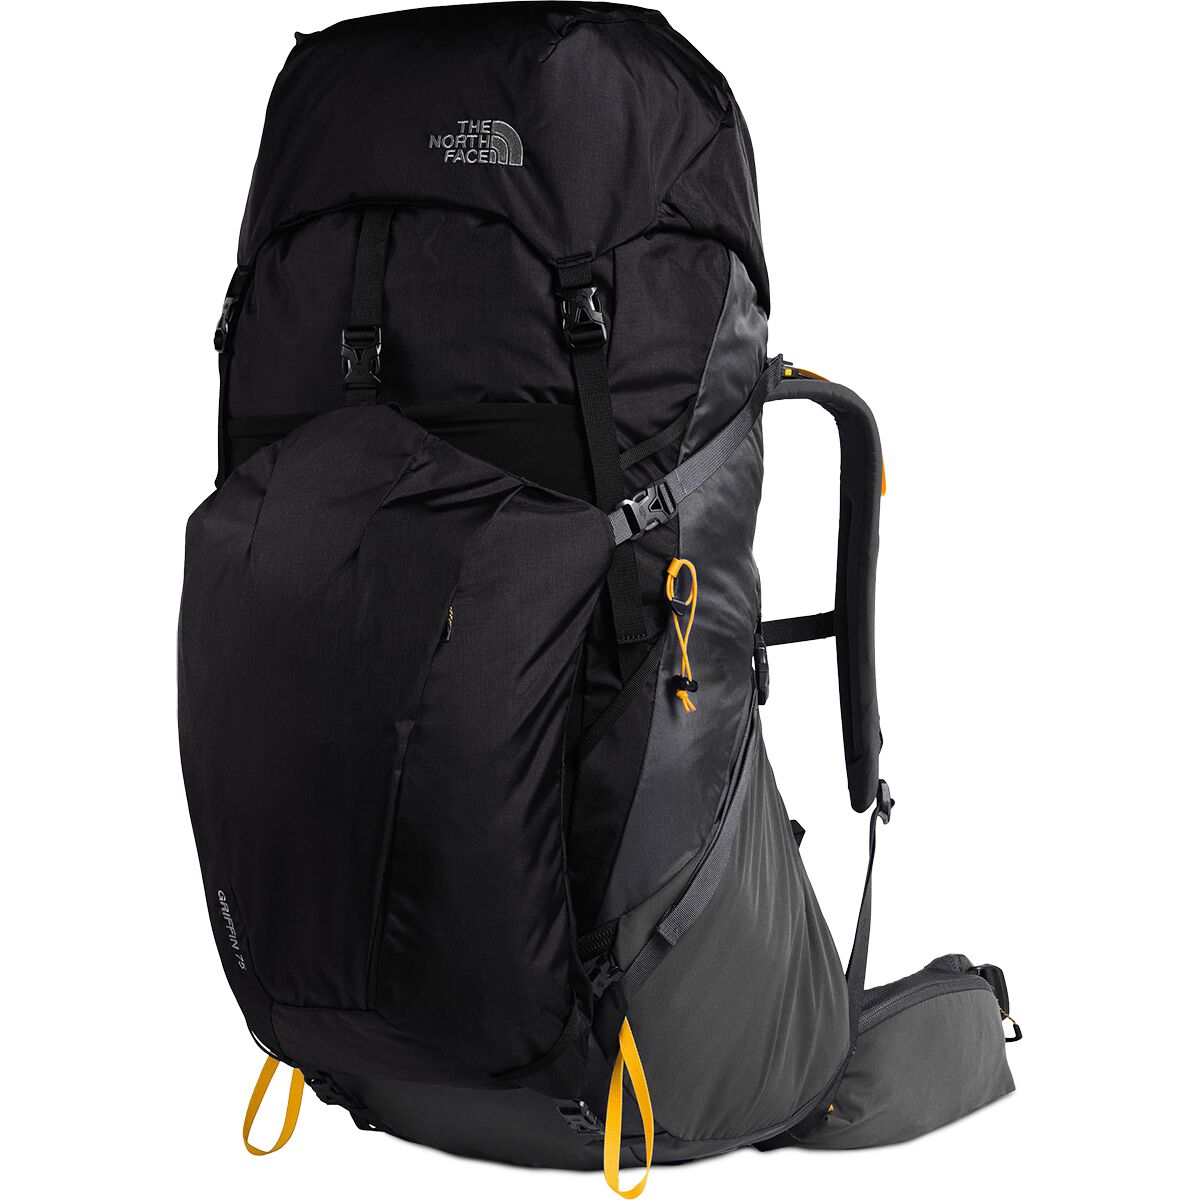 The North Face Griffin 75L Backpack